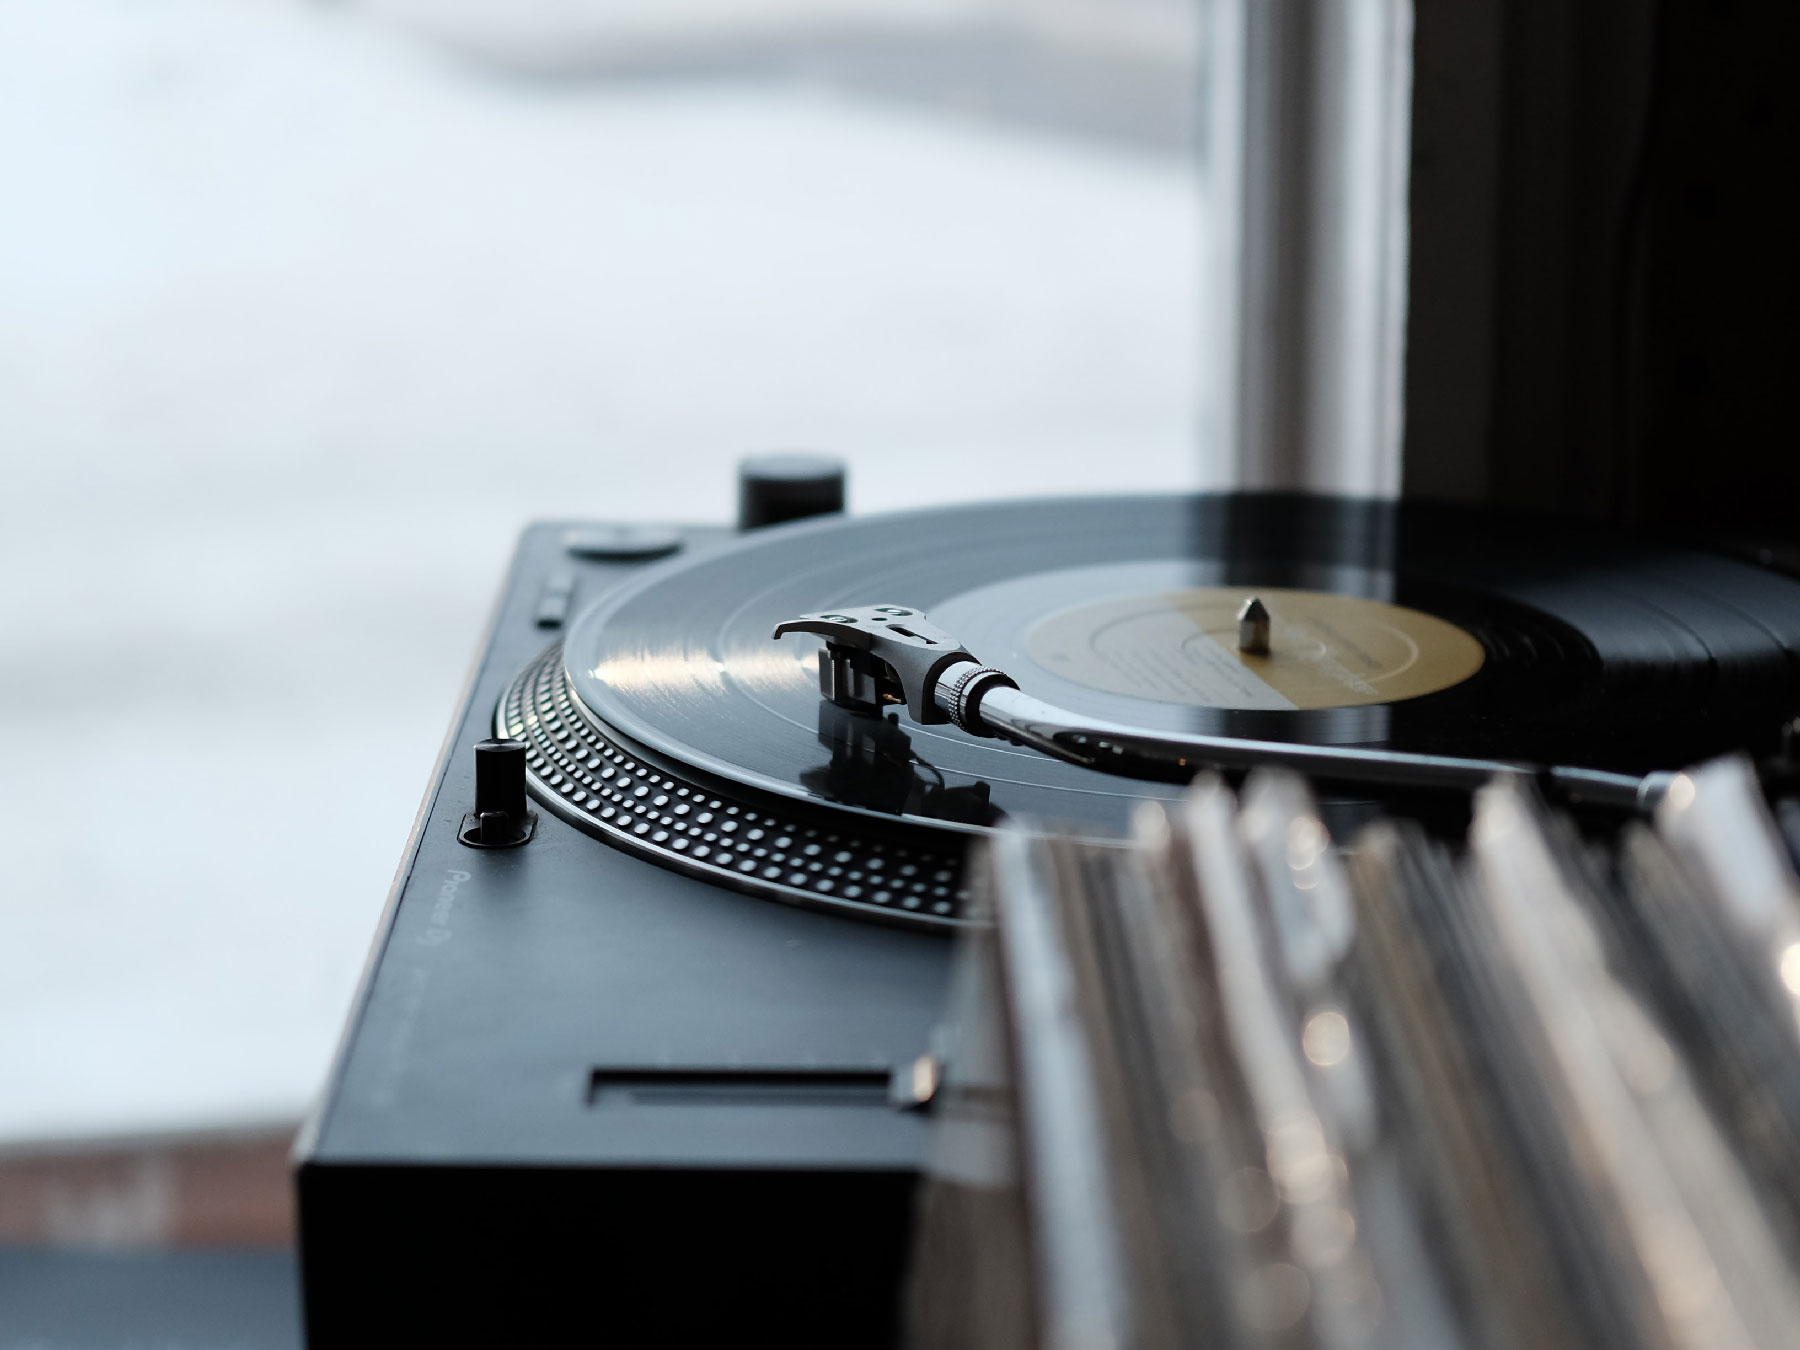 vinyl playing on turntable